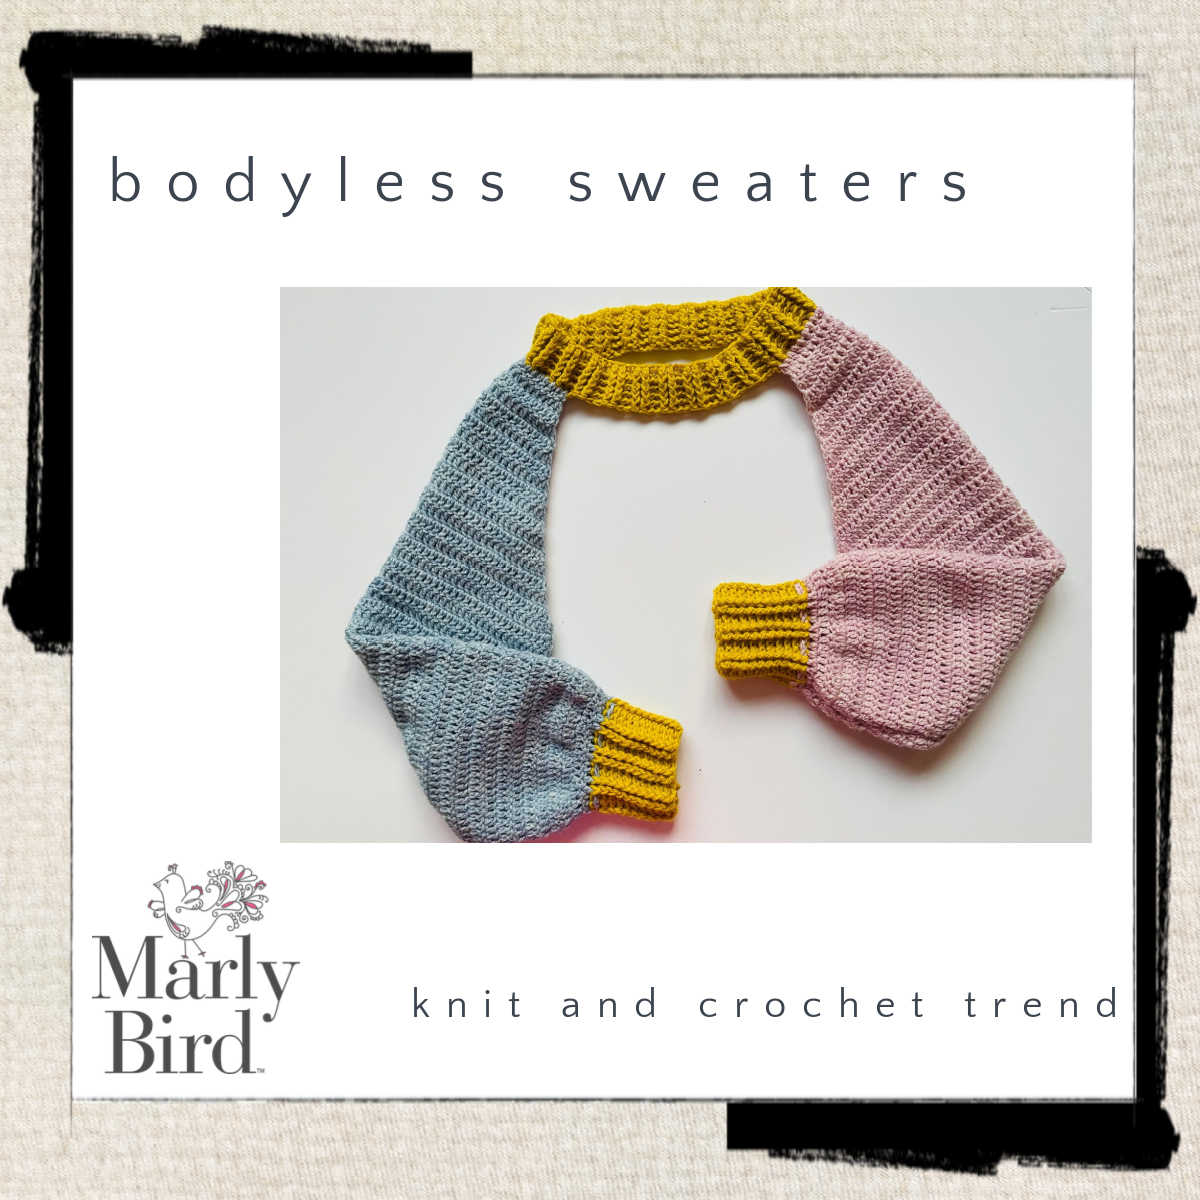 crochet and knit bodiless sweaters - Marly Bird